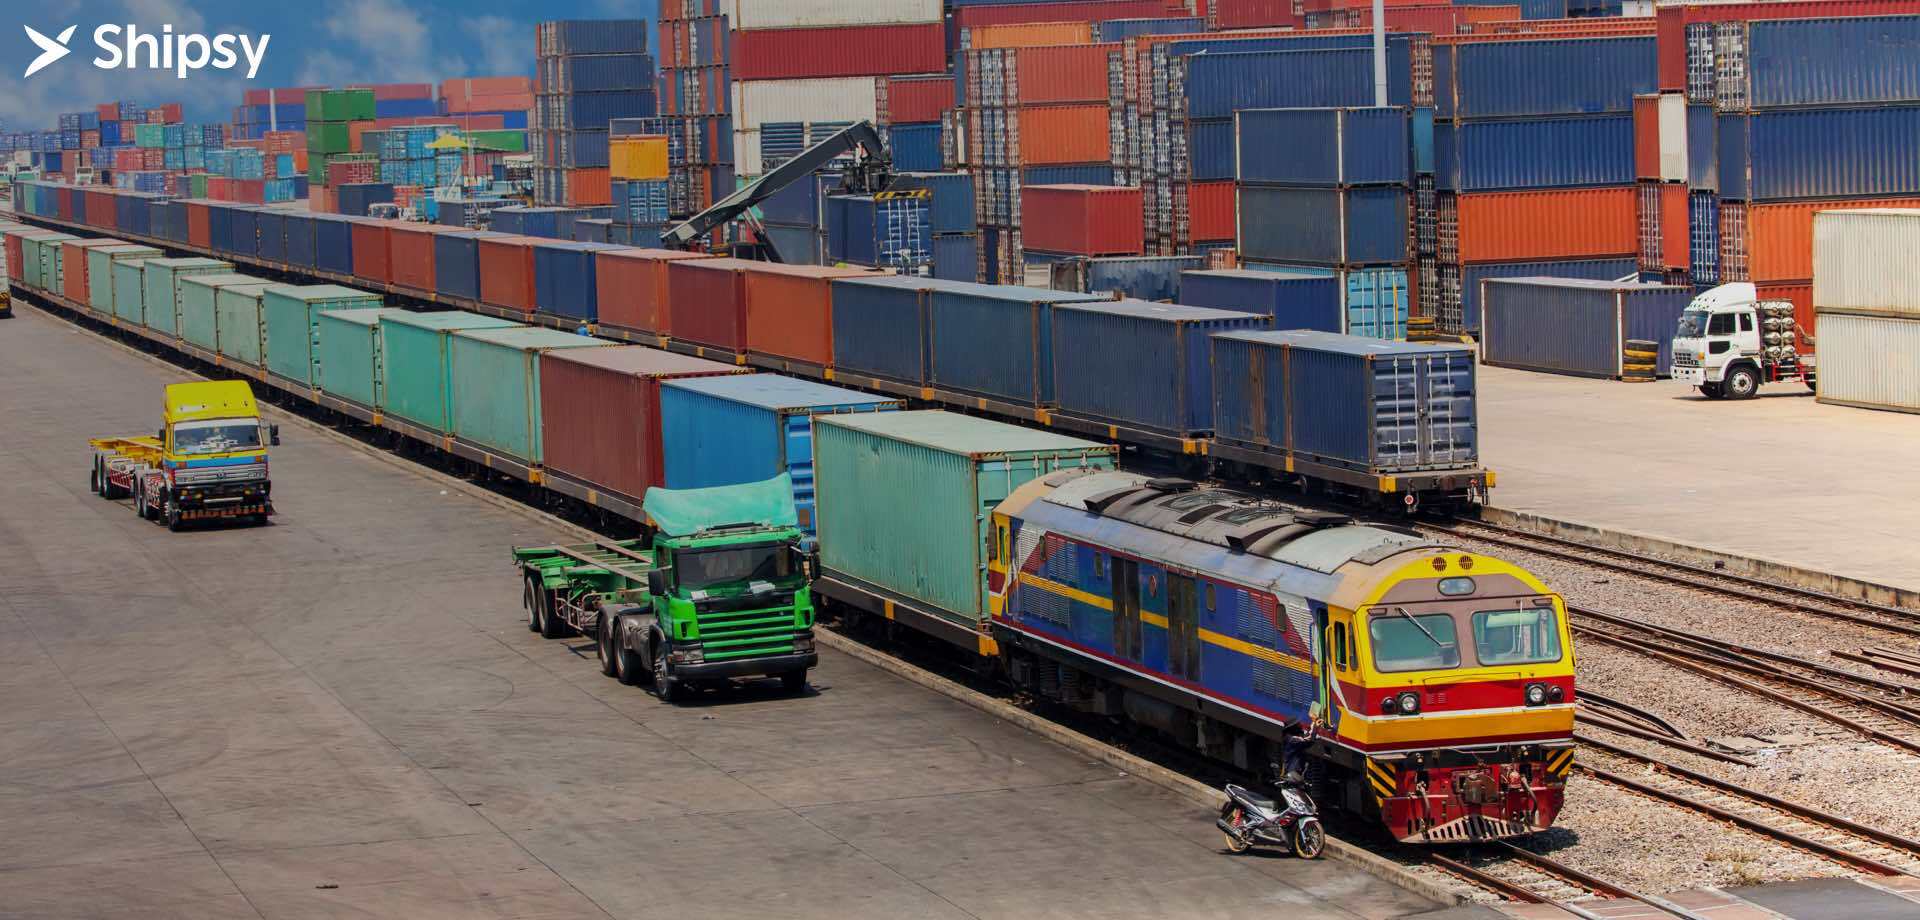 Six Easy Ways Supply Chain Visibility Can Drastically Reduce Intermodal Logistics Costs